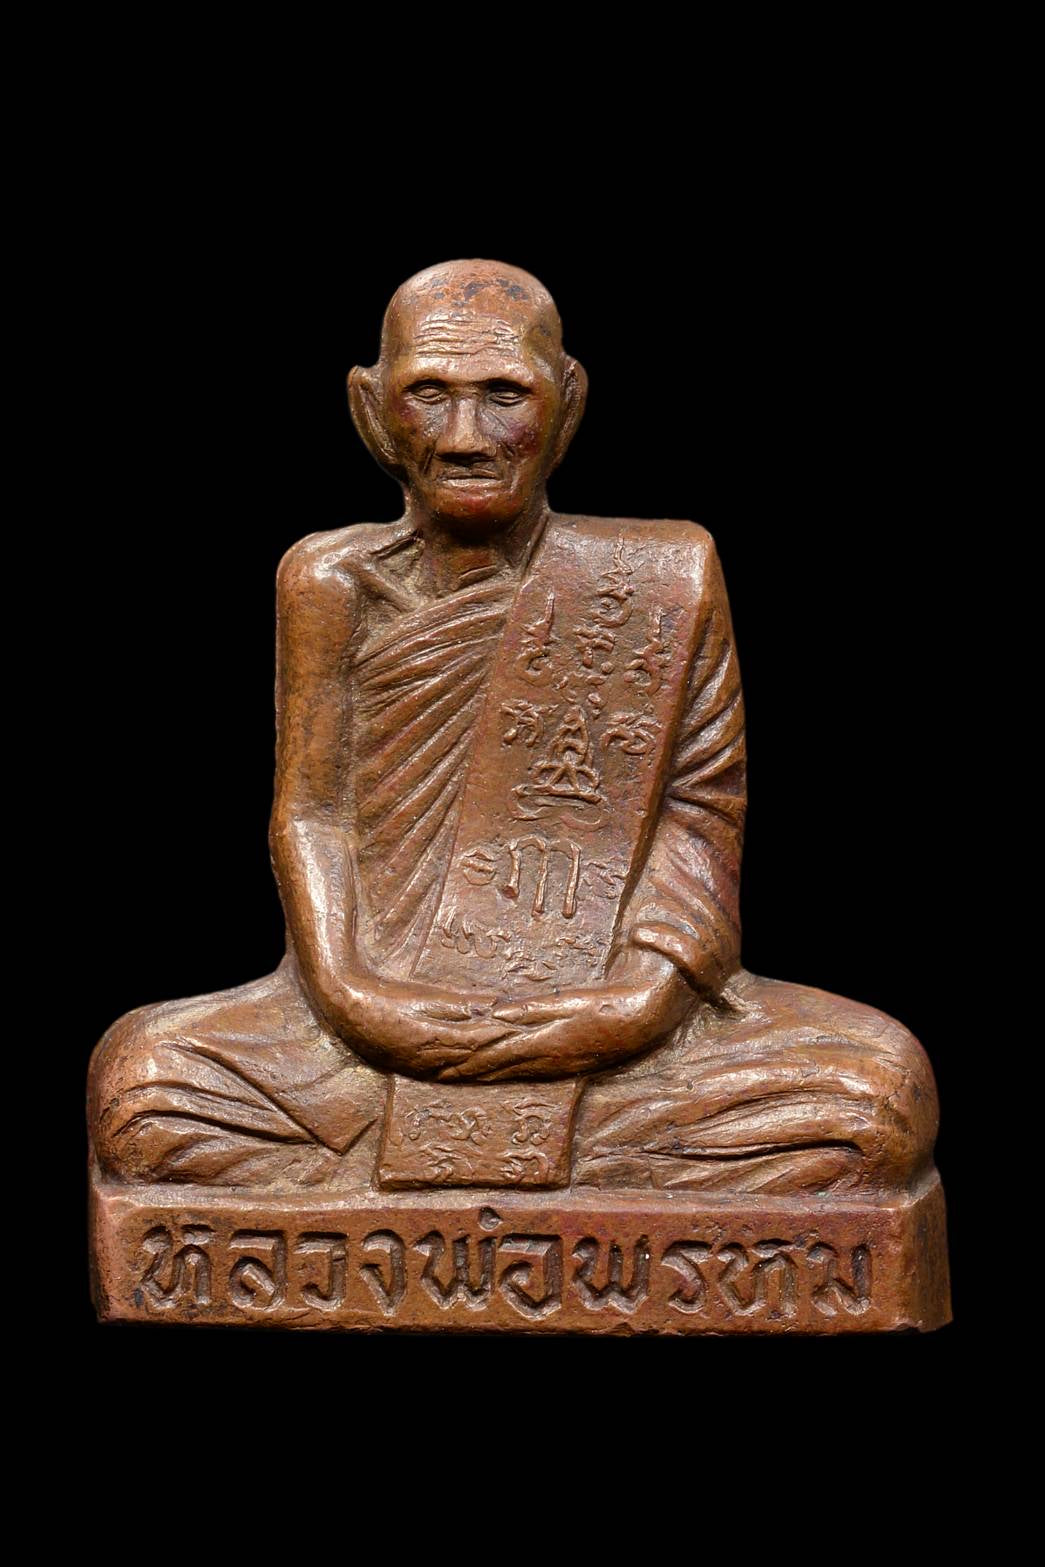 The Golden Mouth Aranhant's sitting posture, as depicted by Luang Phor Phrom in Pim Khao Kuang, is characterized by a wide lap . This particular representation, created in 2516, showcases the Grand style of Lp Phrom